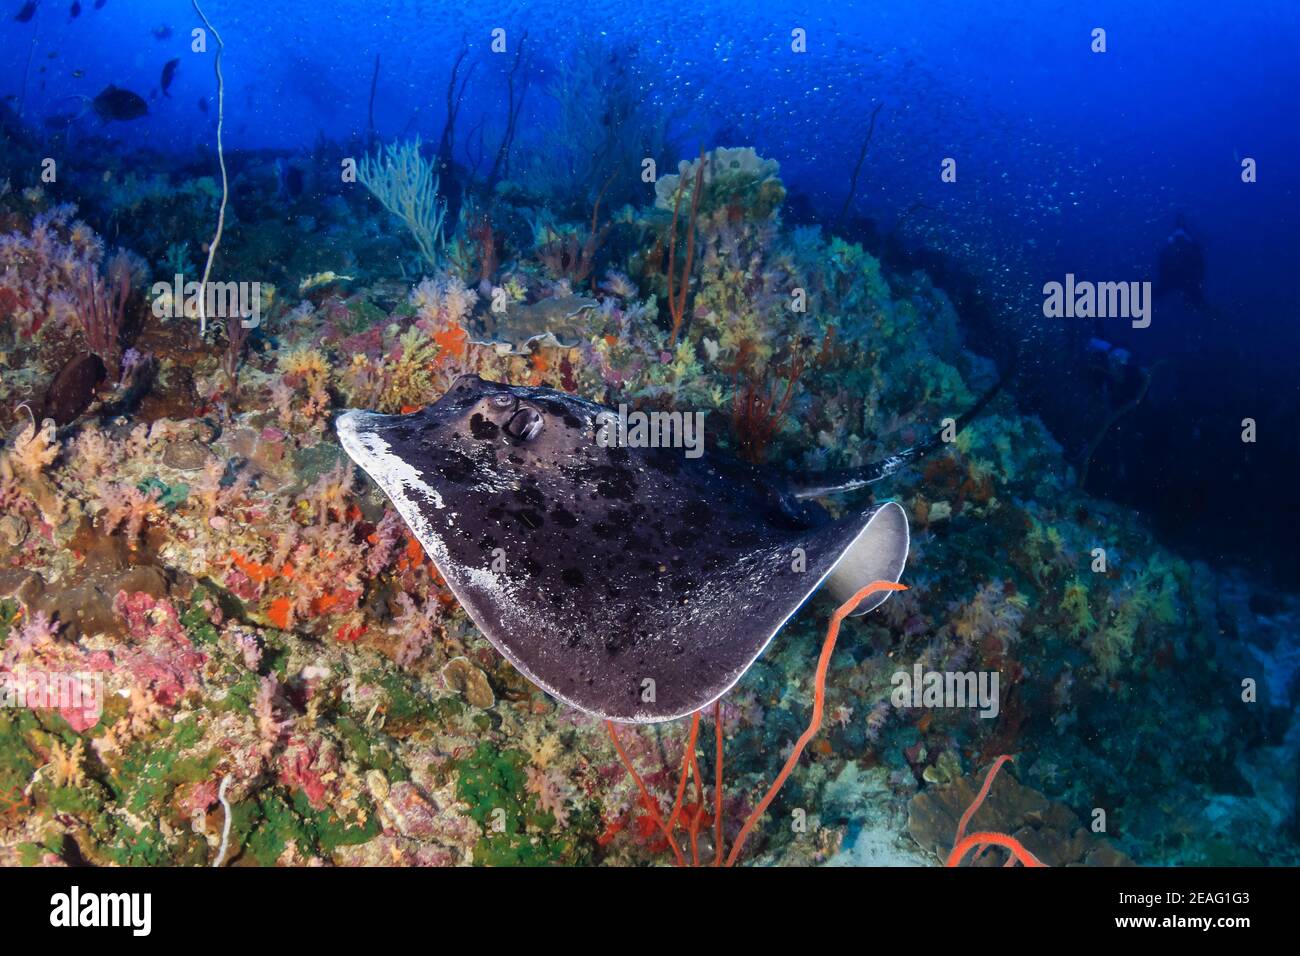 Huge Marble Ray (Taeniura meyeni)) on a colorful tropical coral reef in the Andaman Sea Stock Photo